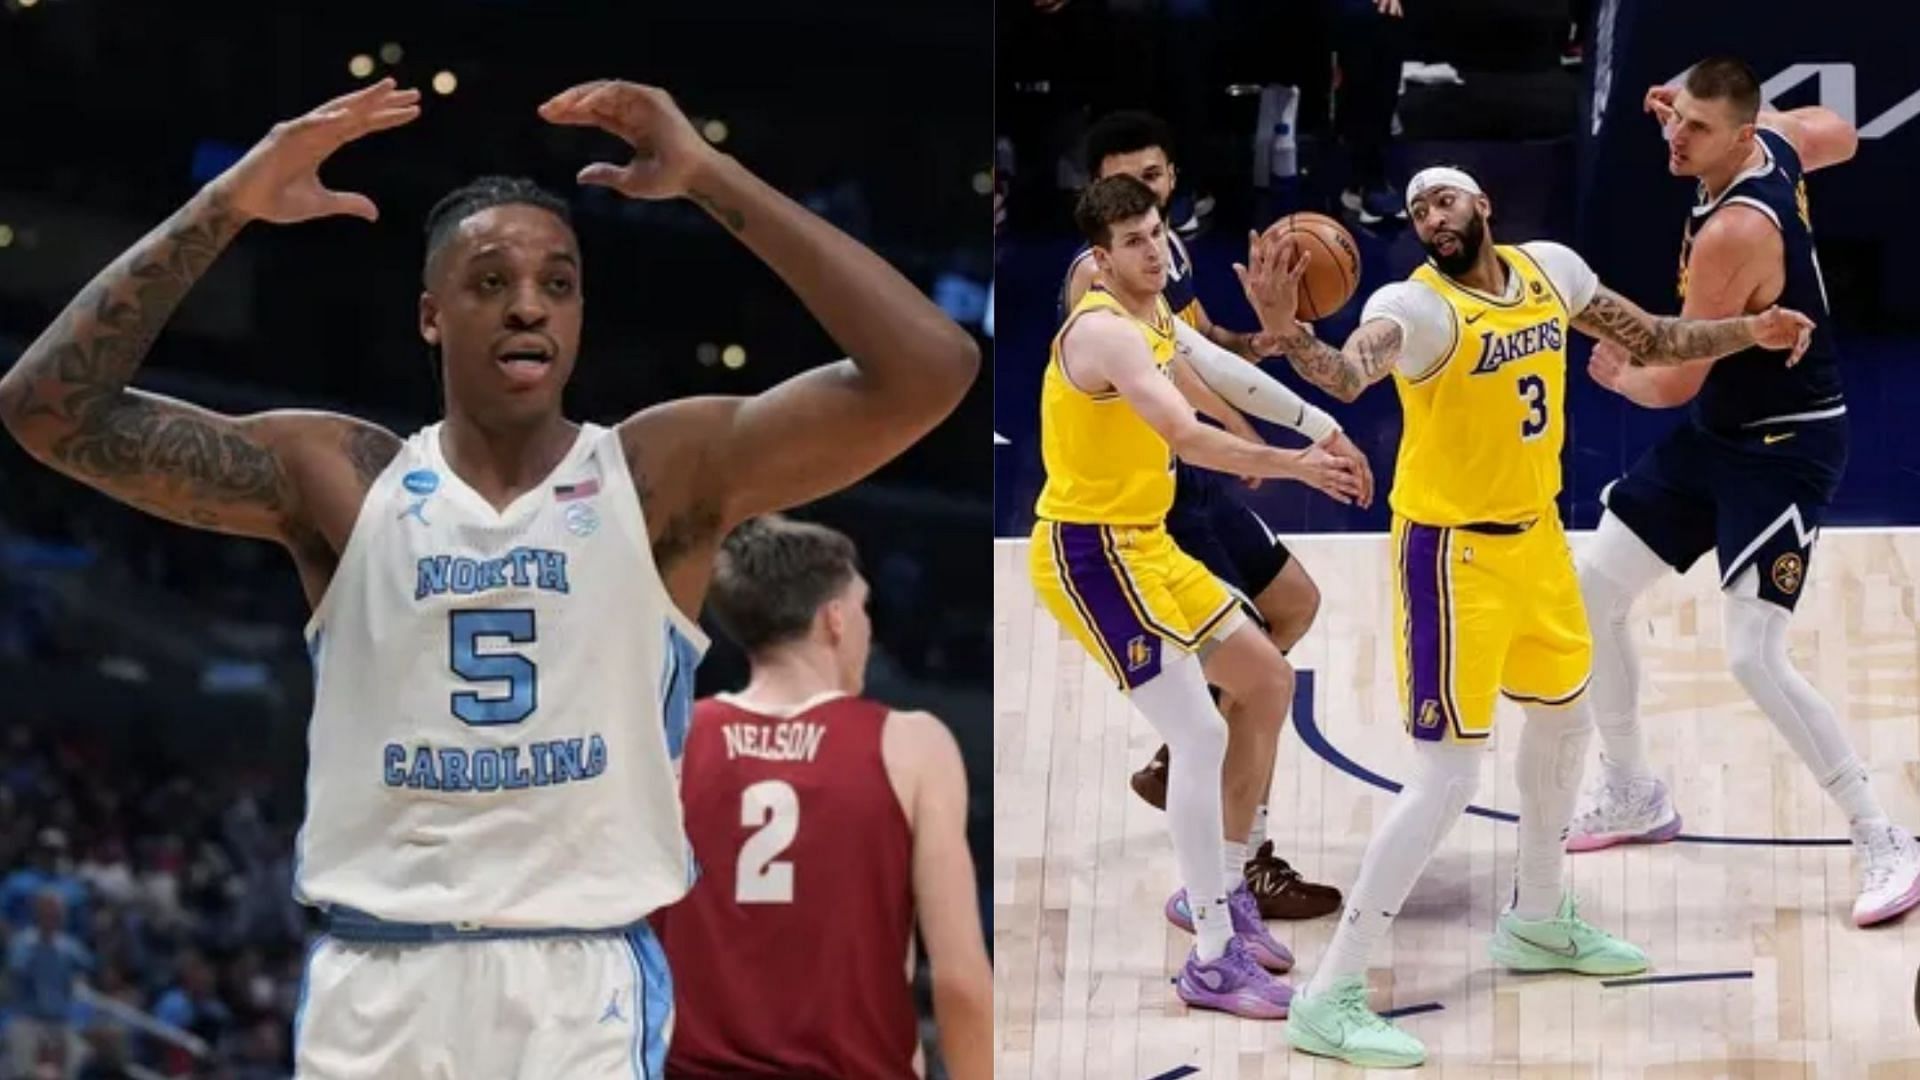 North Carolina big man Armando Bacot had a training session with the Los Angeles Lakers this month (Image Source: IMAGN).